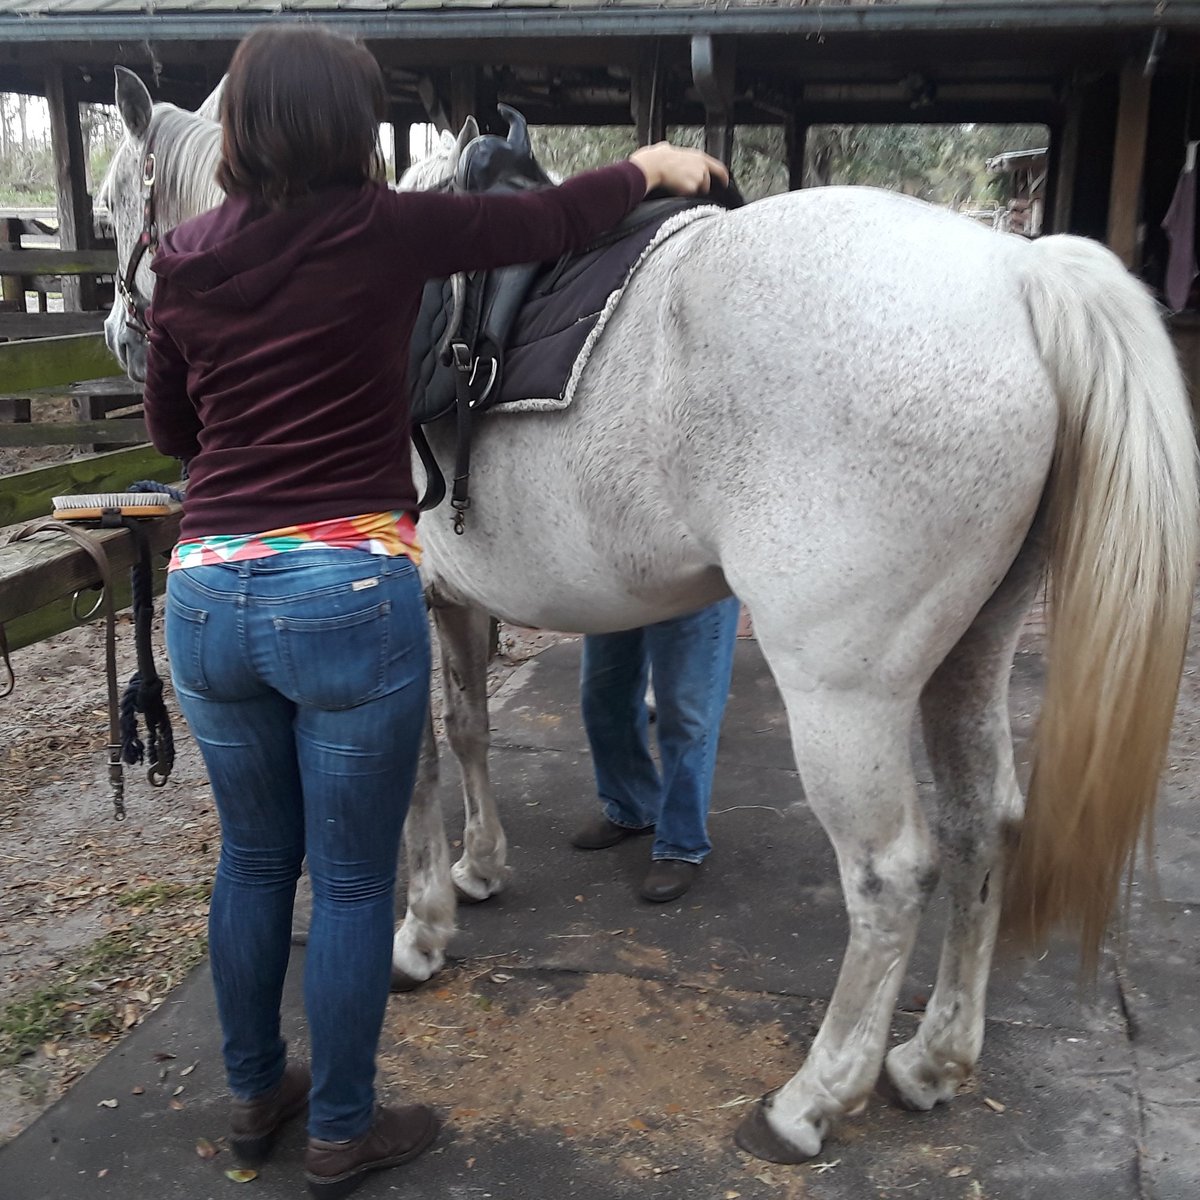 I've got to say best thing to do is rediscover the true you. Get back in the saddle and ride. Horse Spring Farm was awesome . Lorraine takes great care of her horse friends and they give so much love back. #rediscoveryou #horsespirit #backinthesaddle #feelingblessed